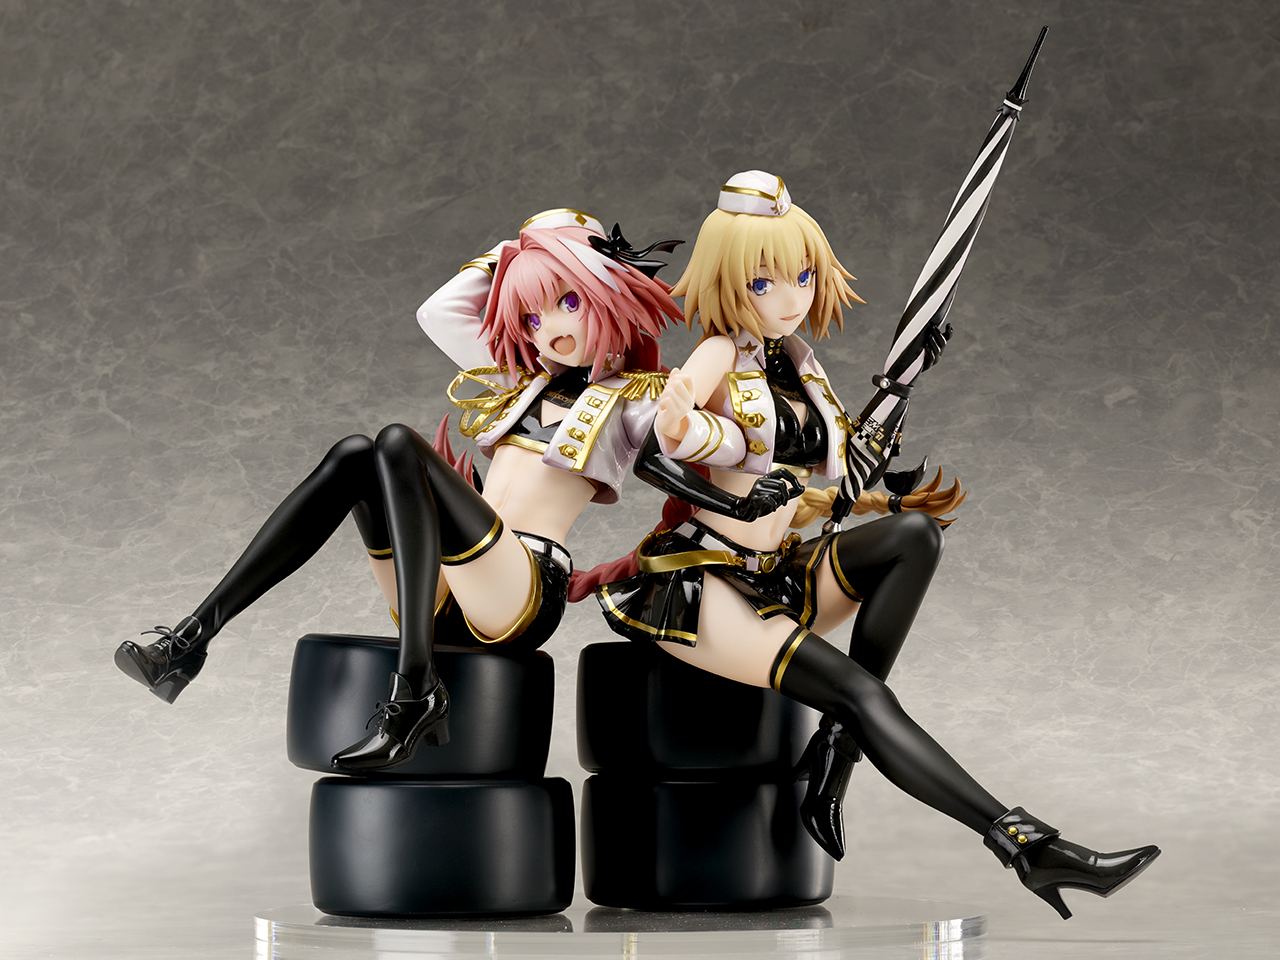 FATE/APOCRYPHA 1/7 SCALE PRE-PAINTED FIGURE: JEANNE D'ARC & ASTOLFO TYPE-MOON RACING VER. Stronger Co., Ltd